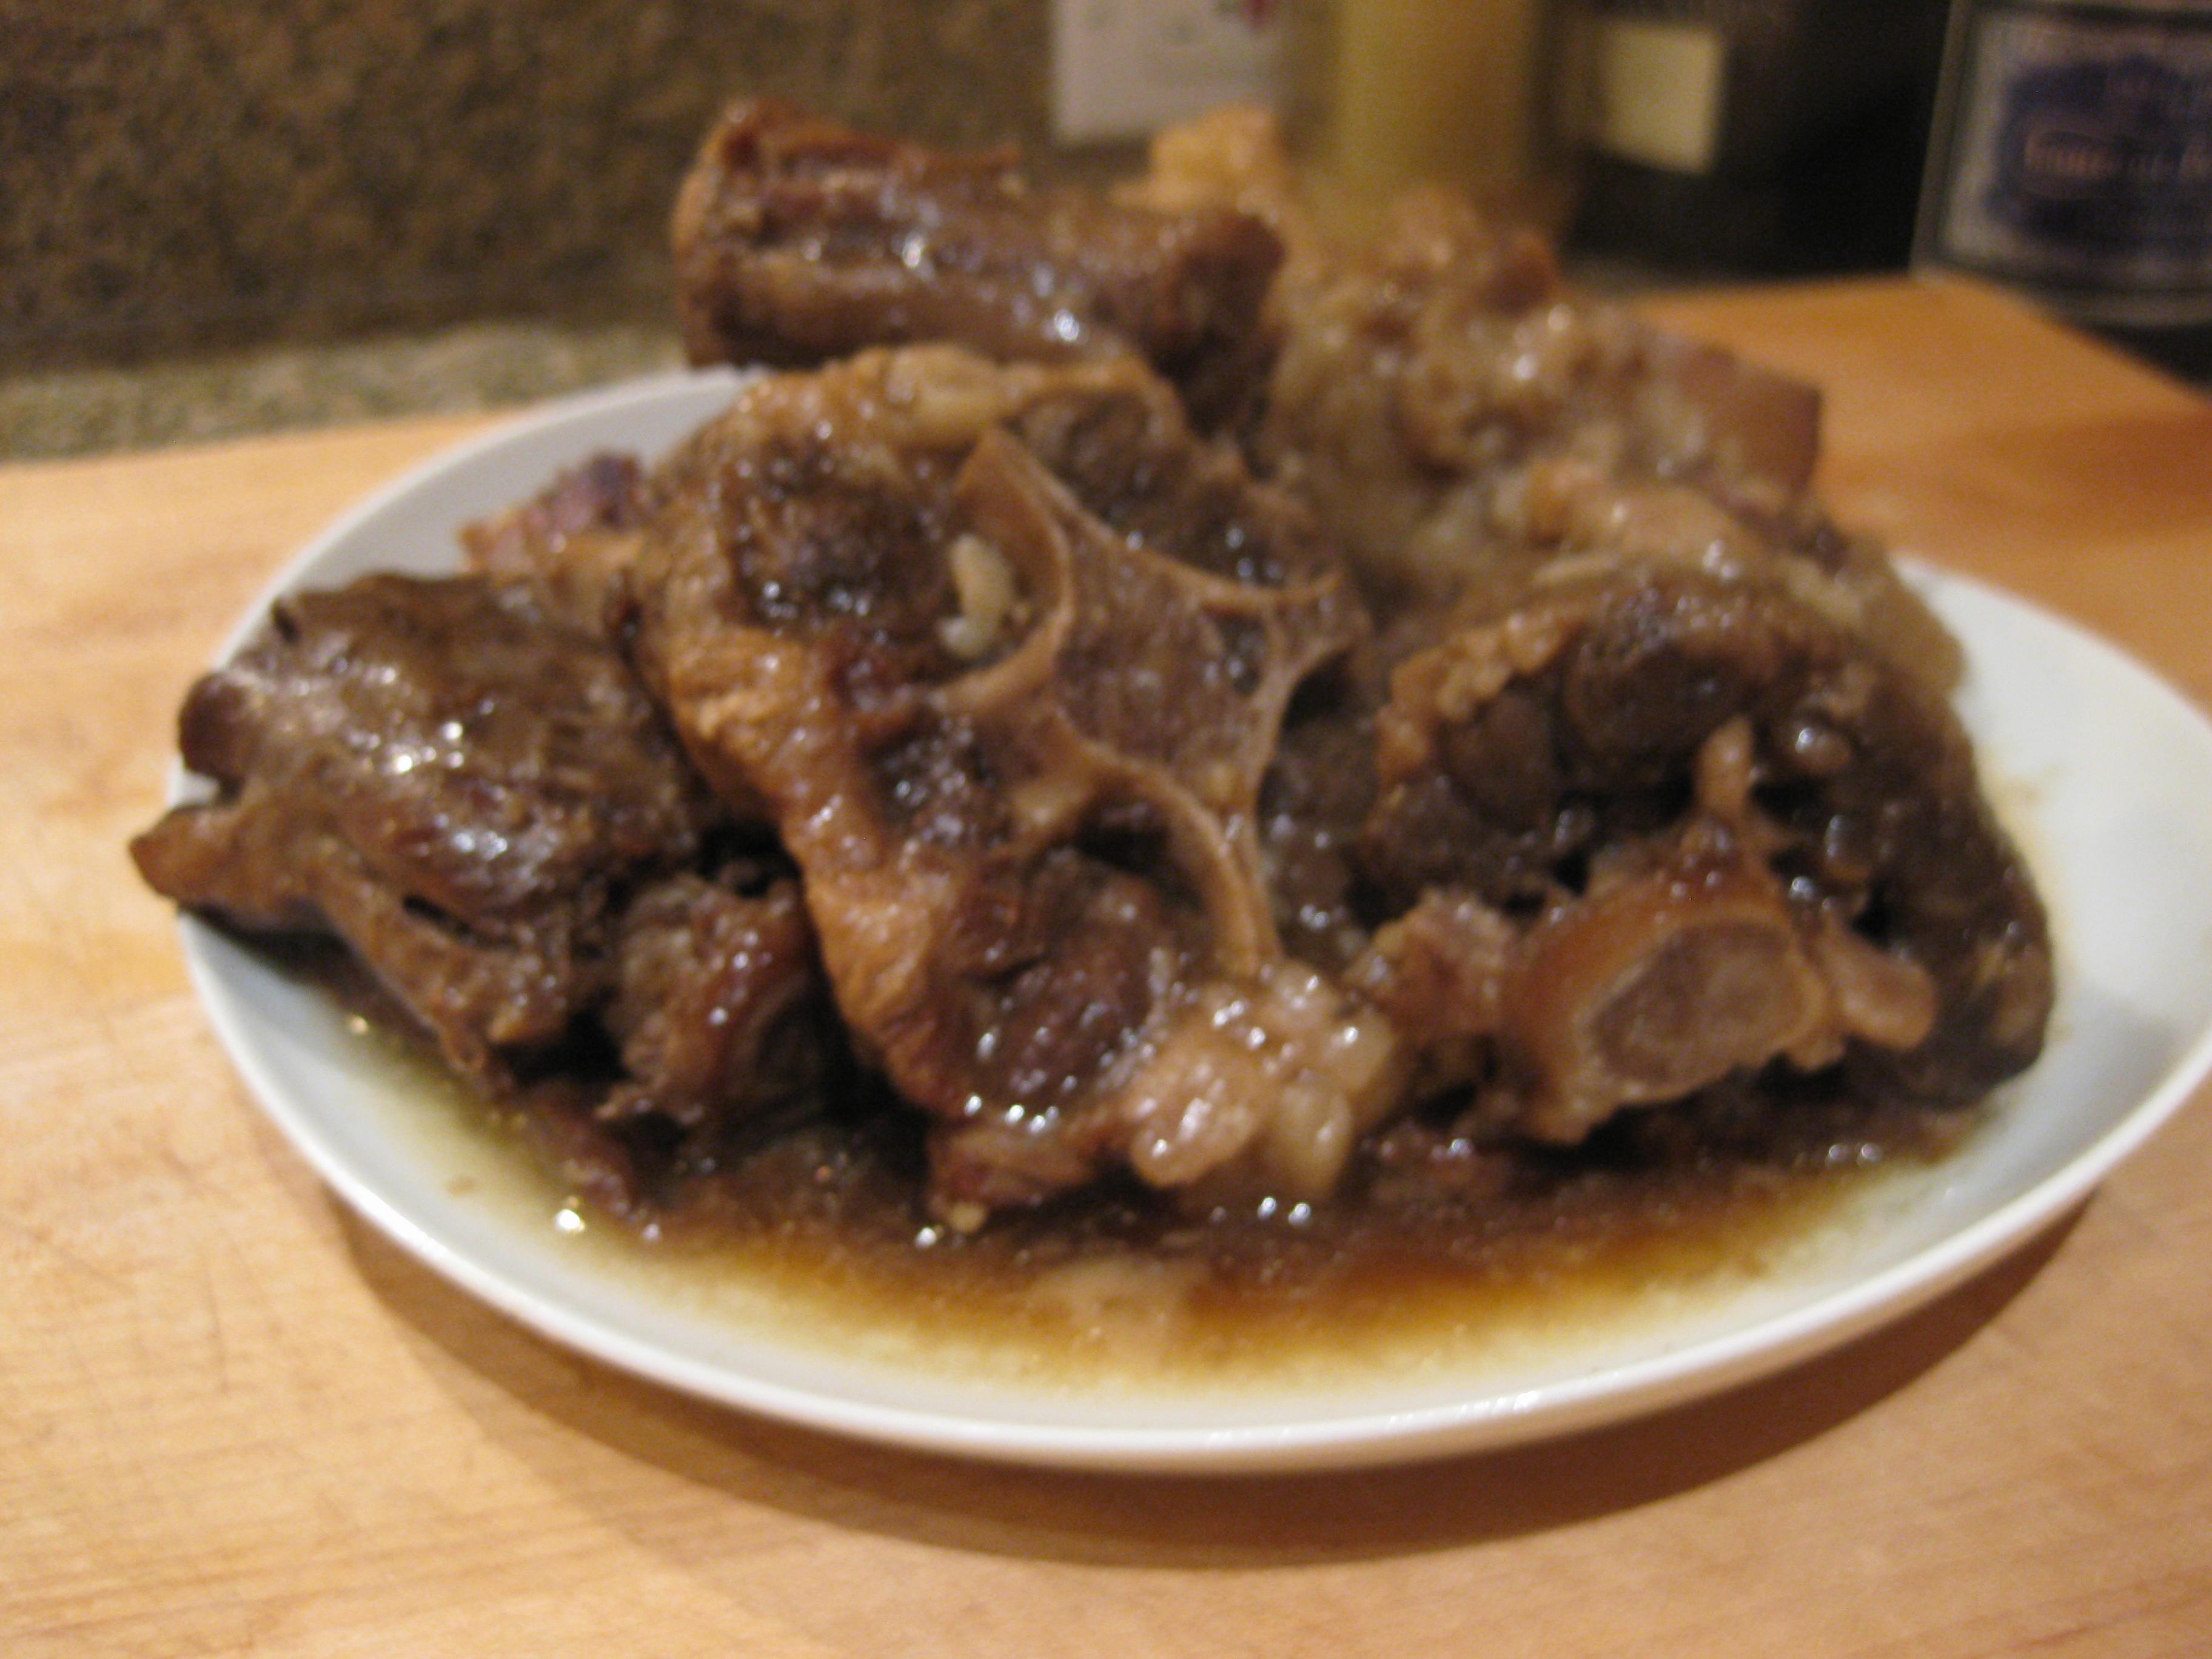 Braised Oxtail...3 hours later